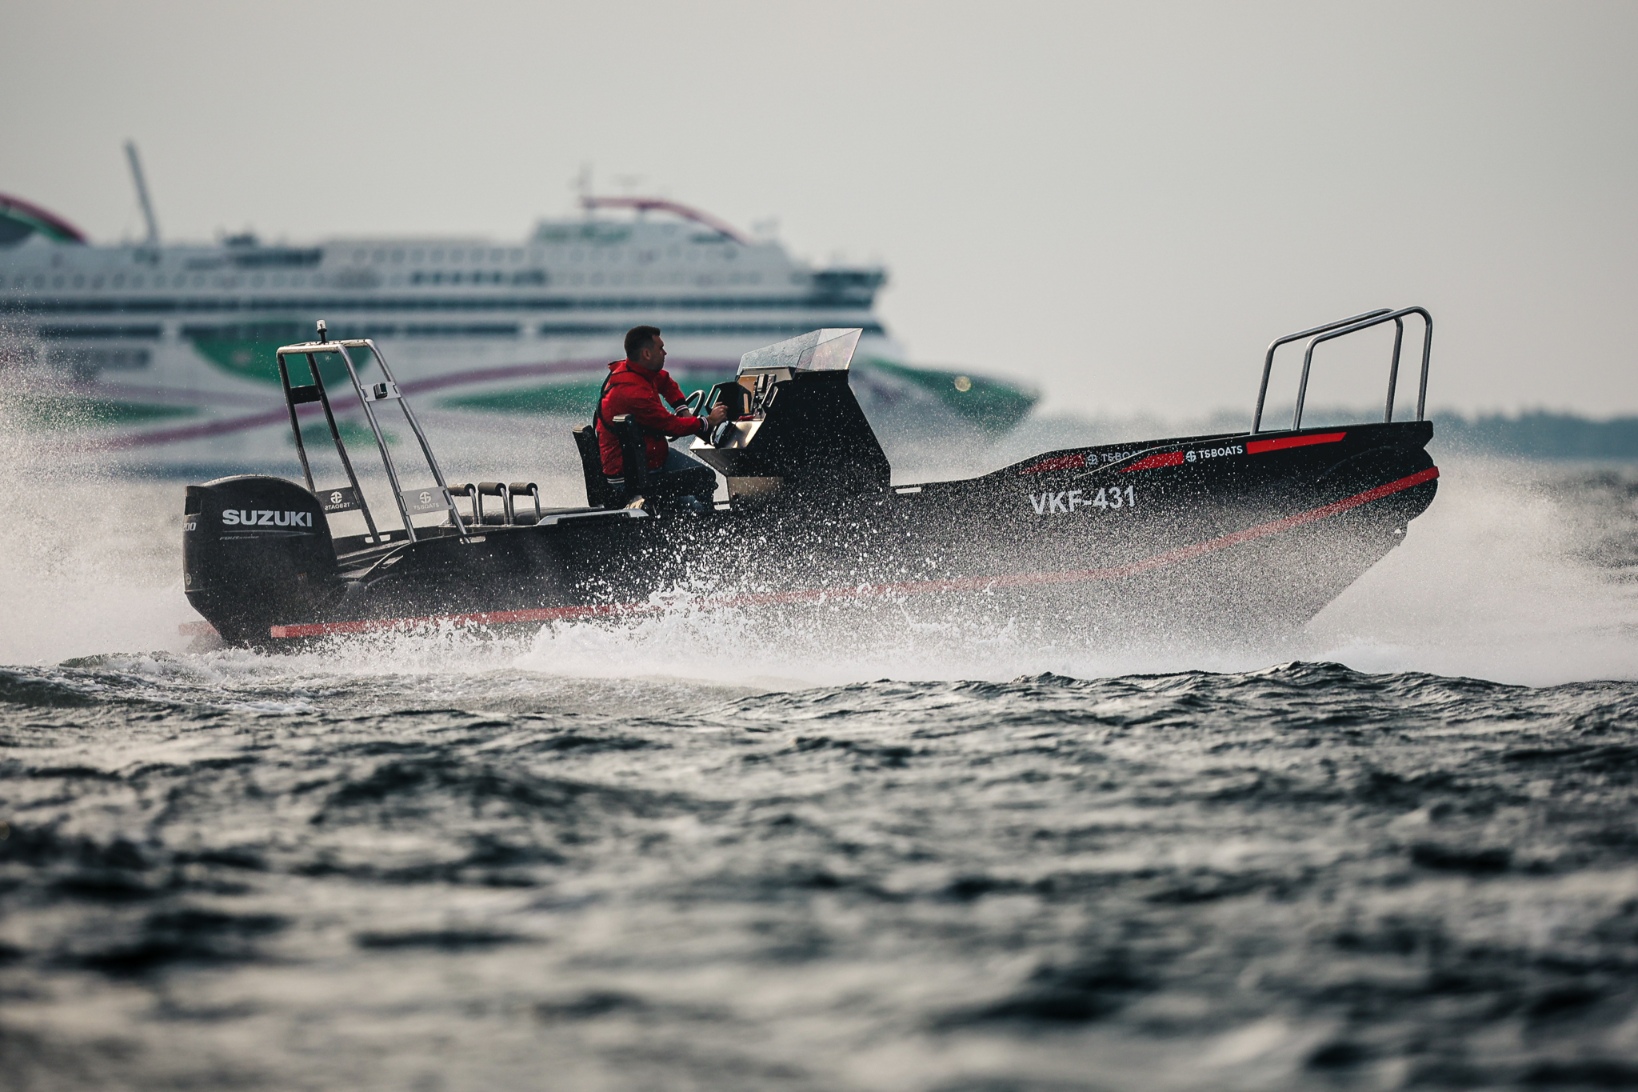 Dynamic image of a man piloting a black and red TS Boats plastic boat with a Suzuki outboard motor, cutting through the water at high speed